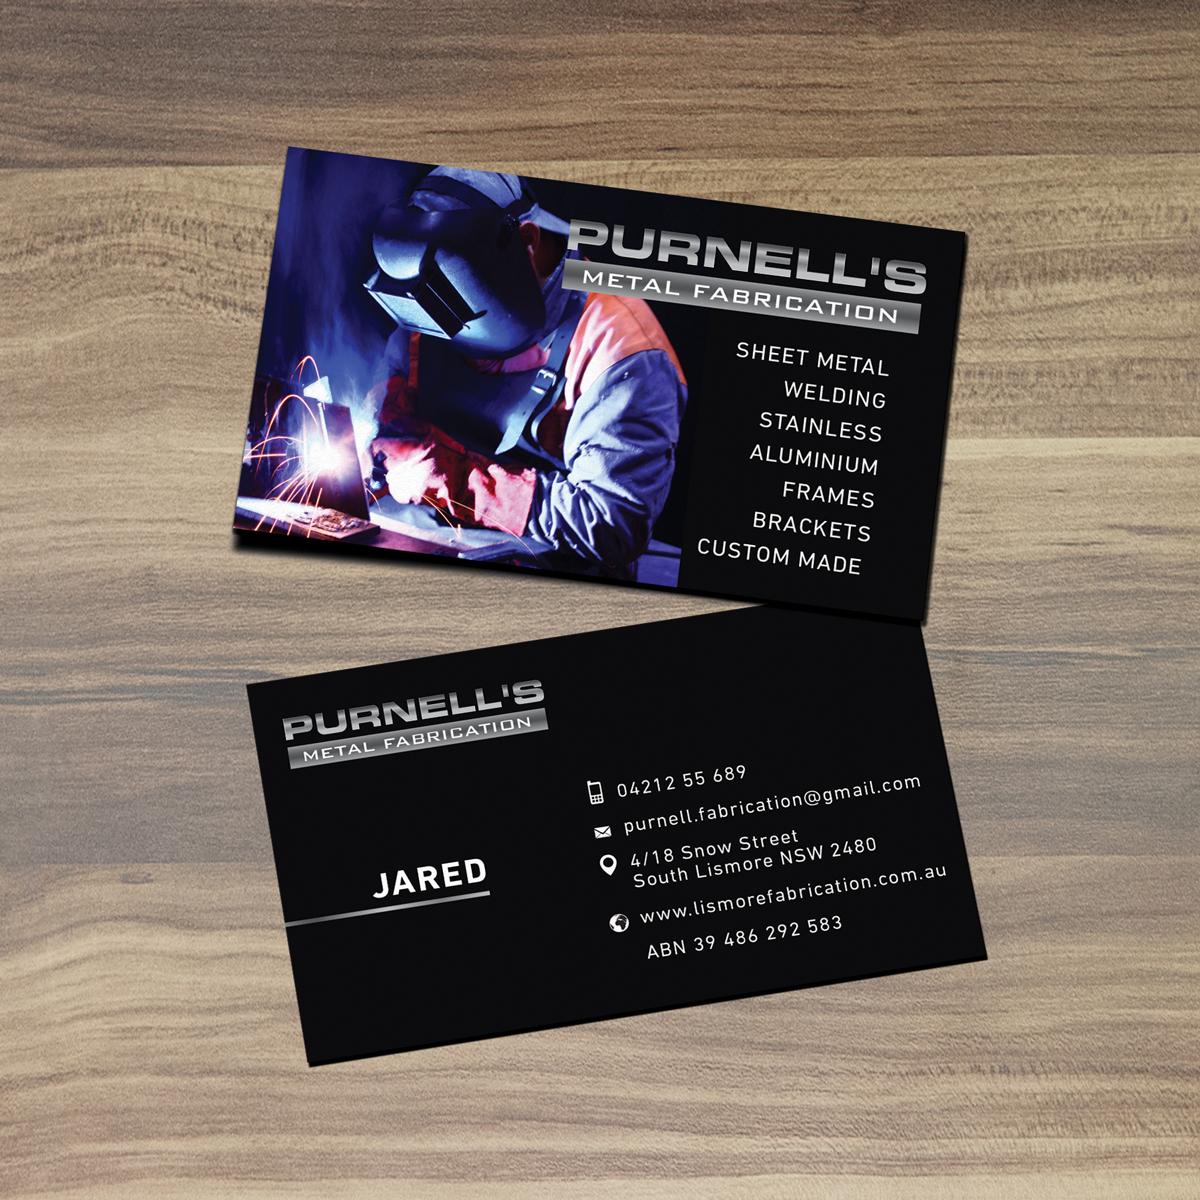 Industrial/Refinery Palm Cards - Louisiana Sign Guy | Signs, Cards, Billboards, and Brochures